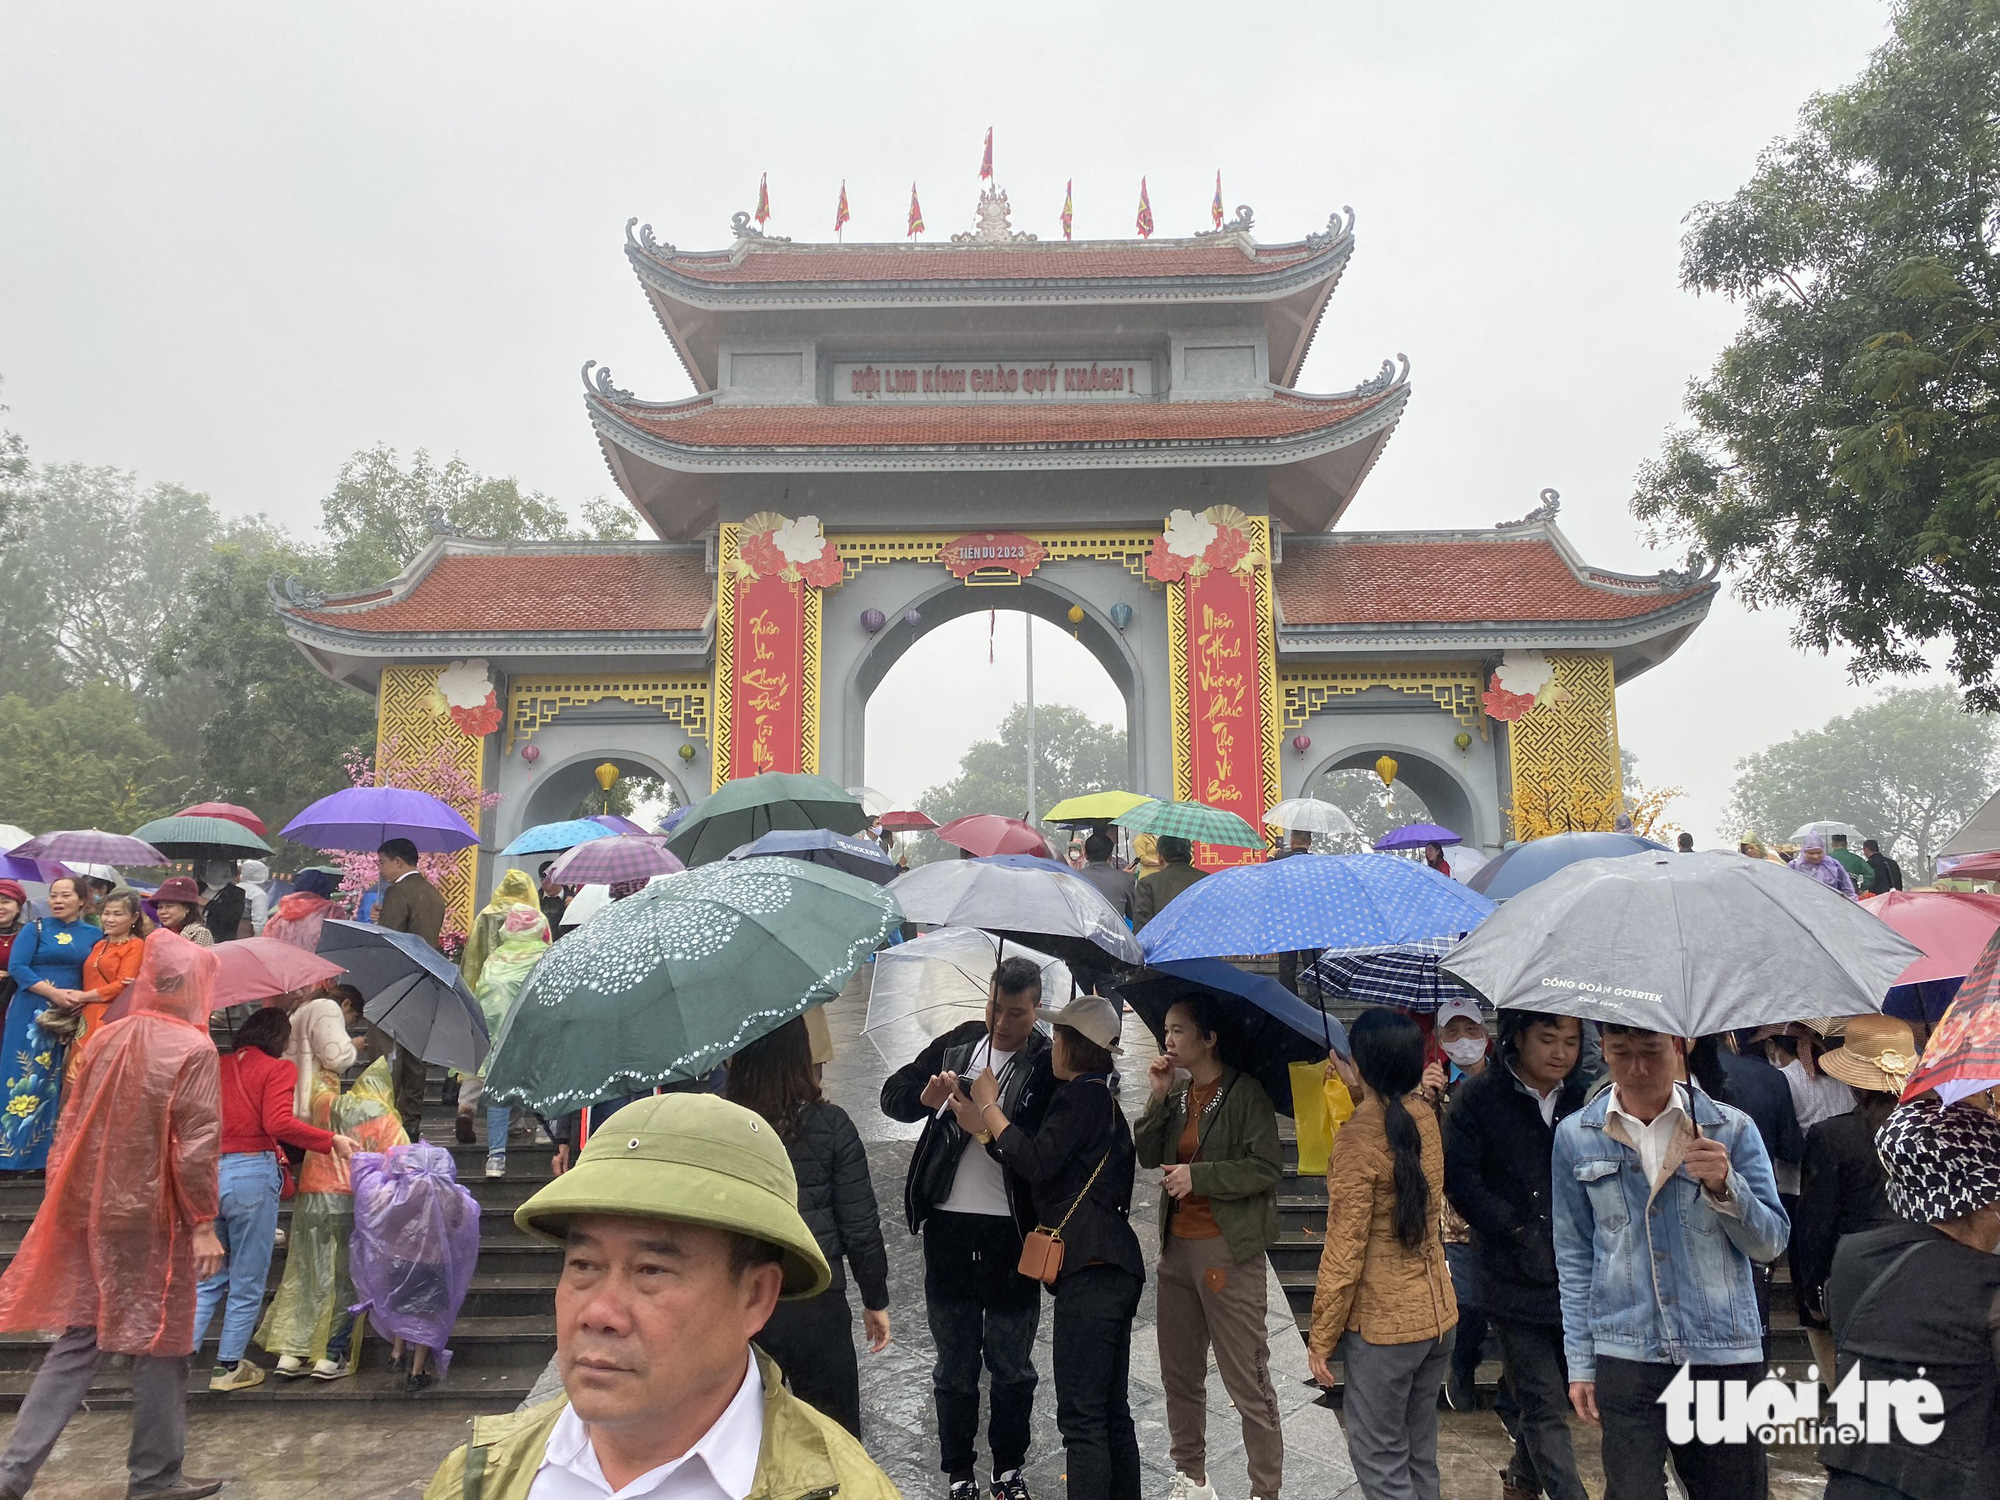 Thousands of visitors flock to Lim Festival in northern Vietnam